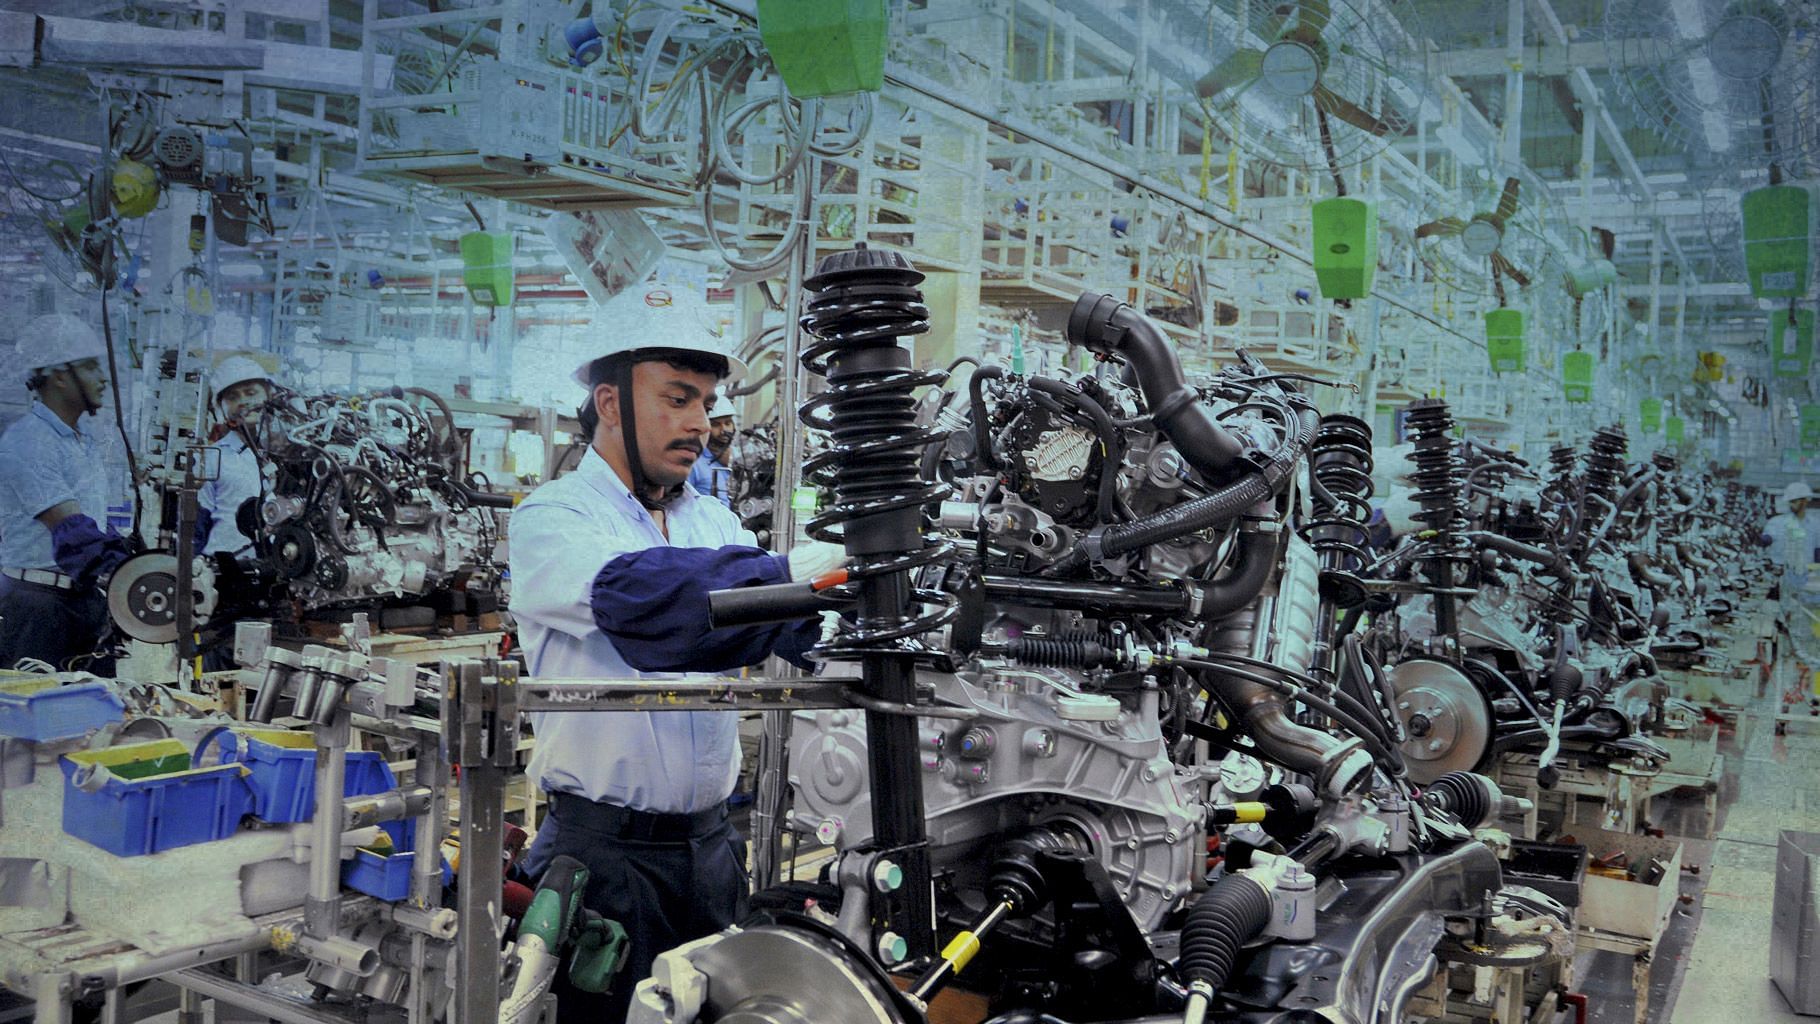 An employee works on Toyota car engines inside the manufacturing plant of Toyota Kirloskar Motor in Bidadi, on the outskirts of Bengaluru, 2015. Image used for representation.